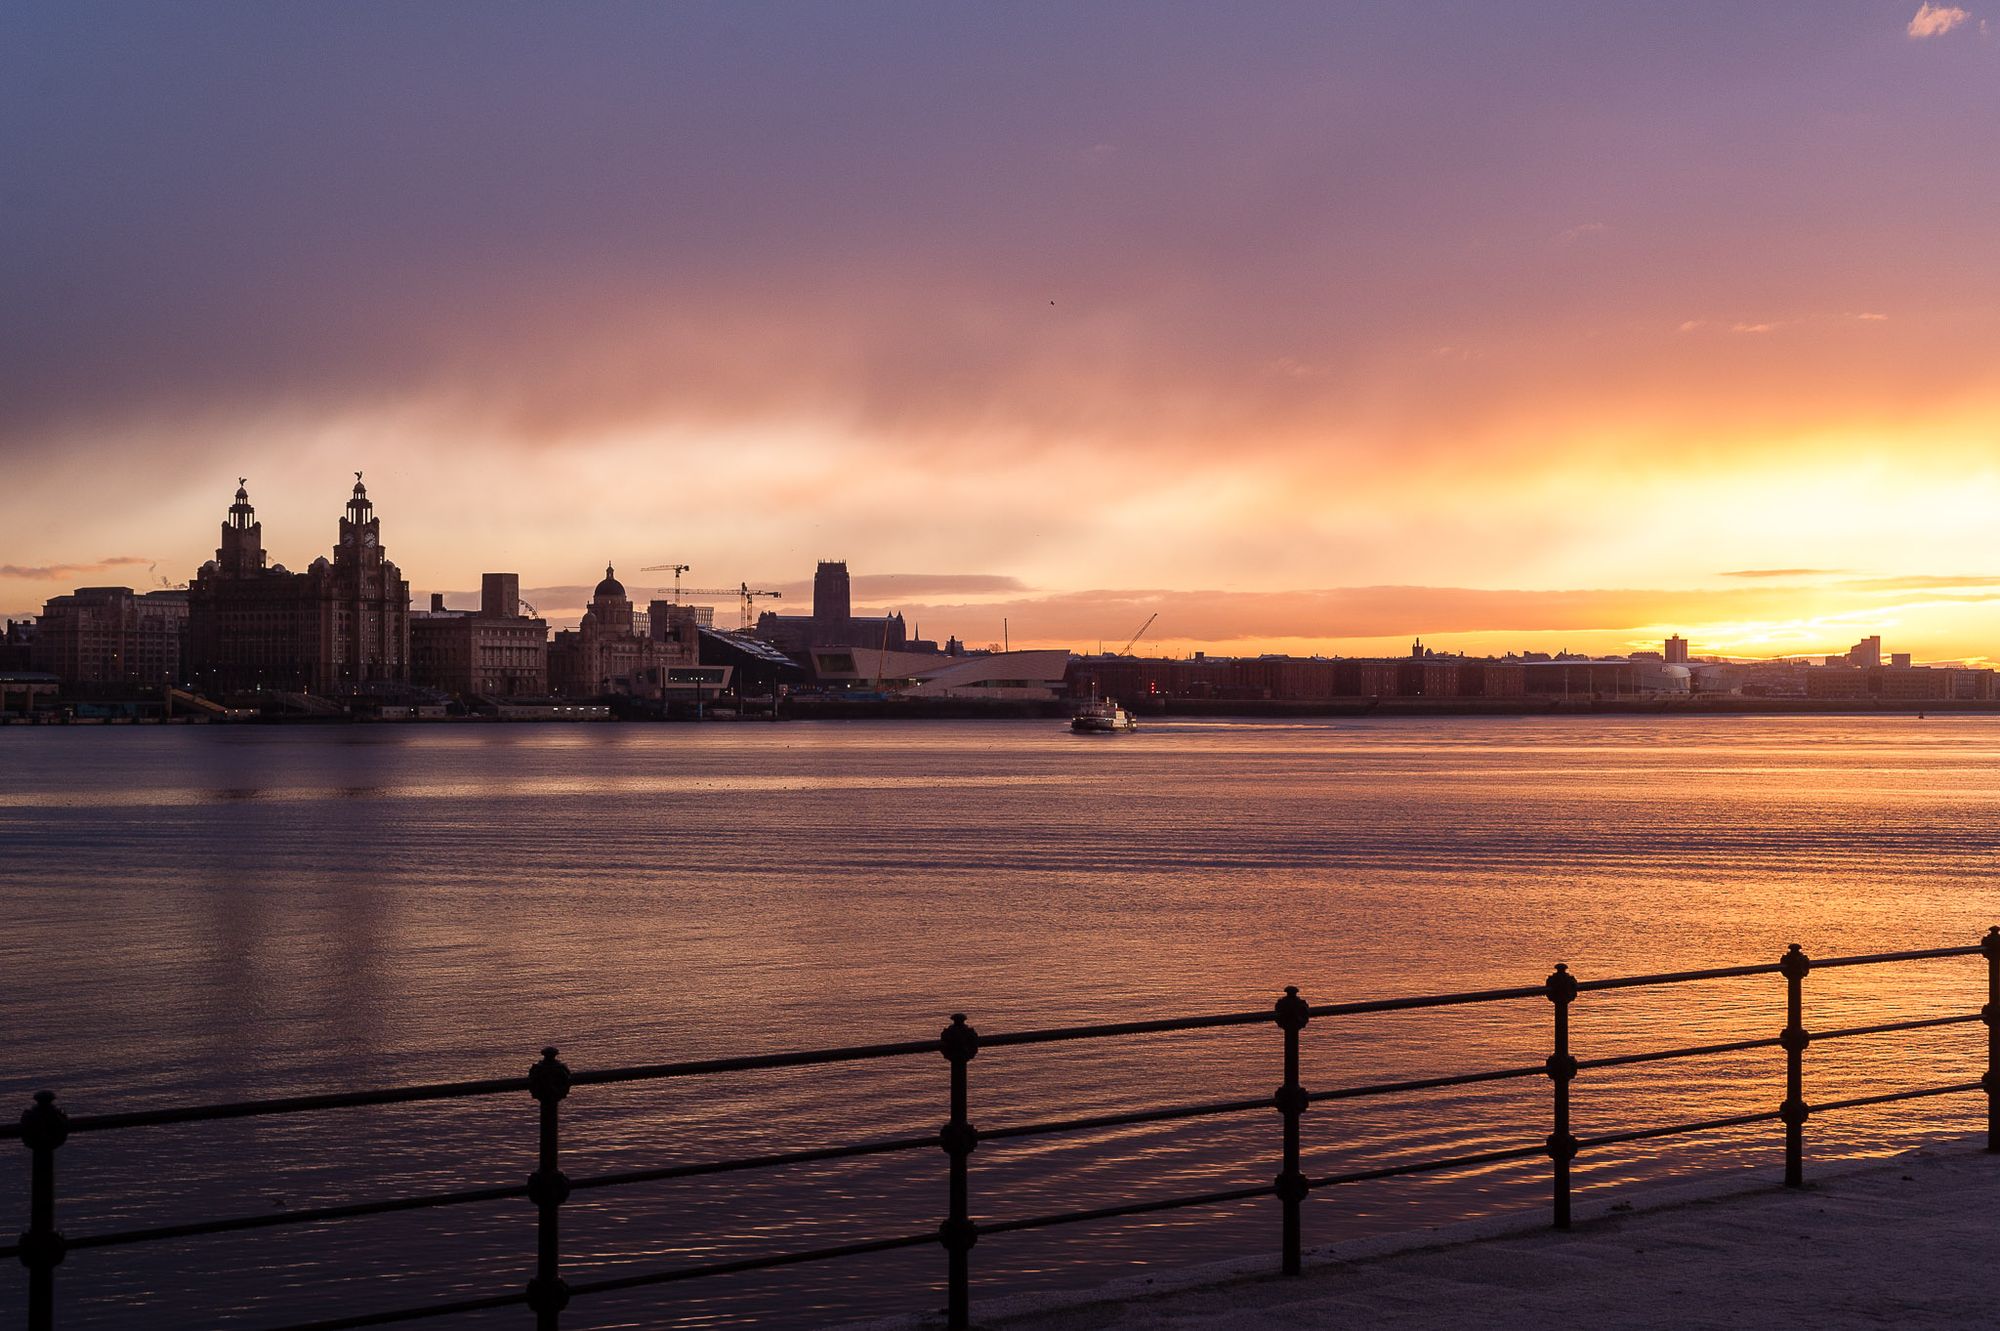 Sunrise over the River Mersey looking towards Liverpool. The Mersey Ferry is coming over and there are purple and yellow colours in the sky.